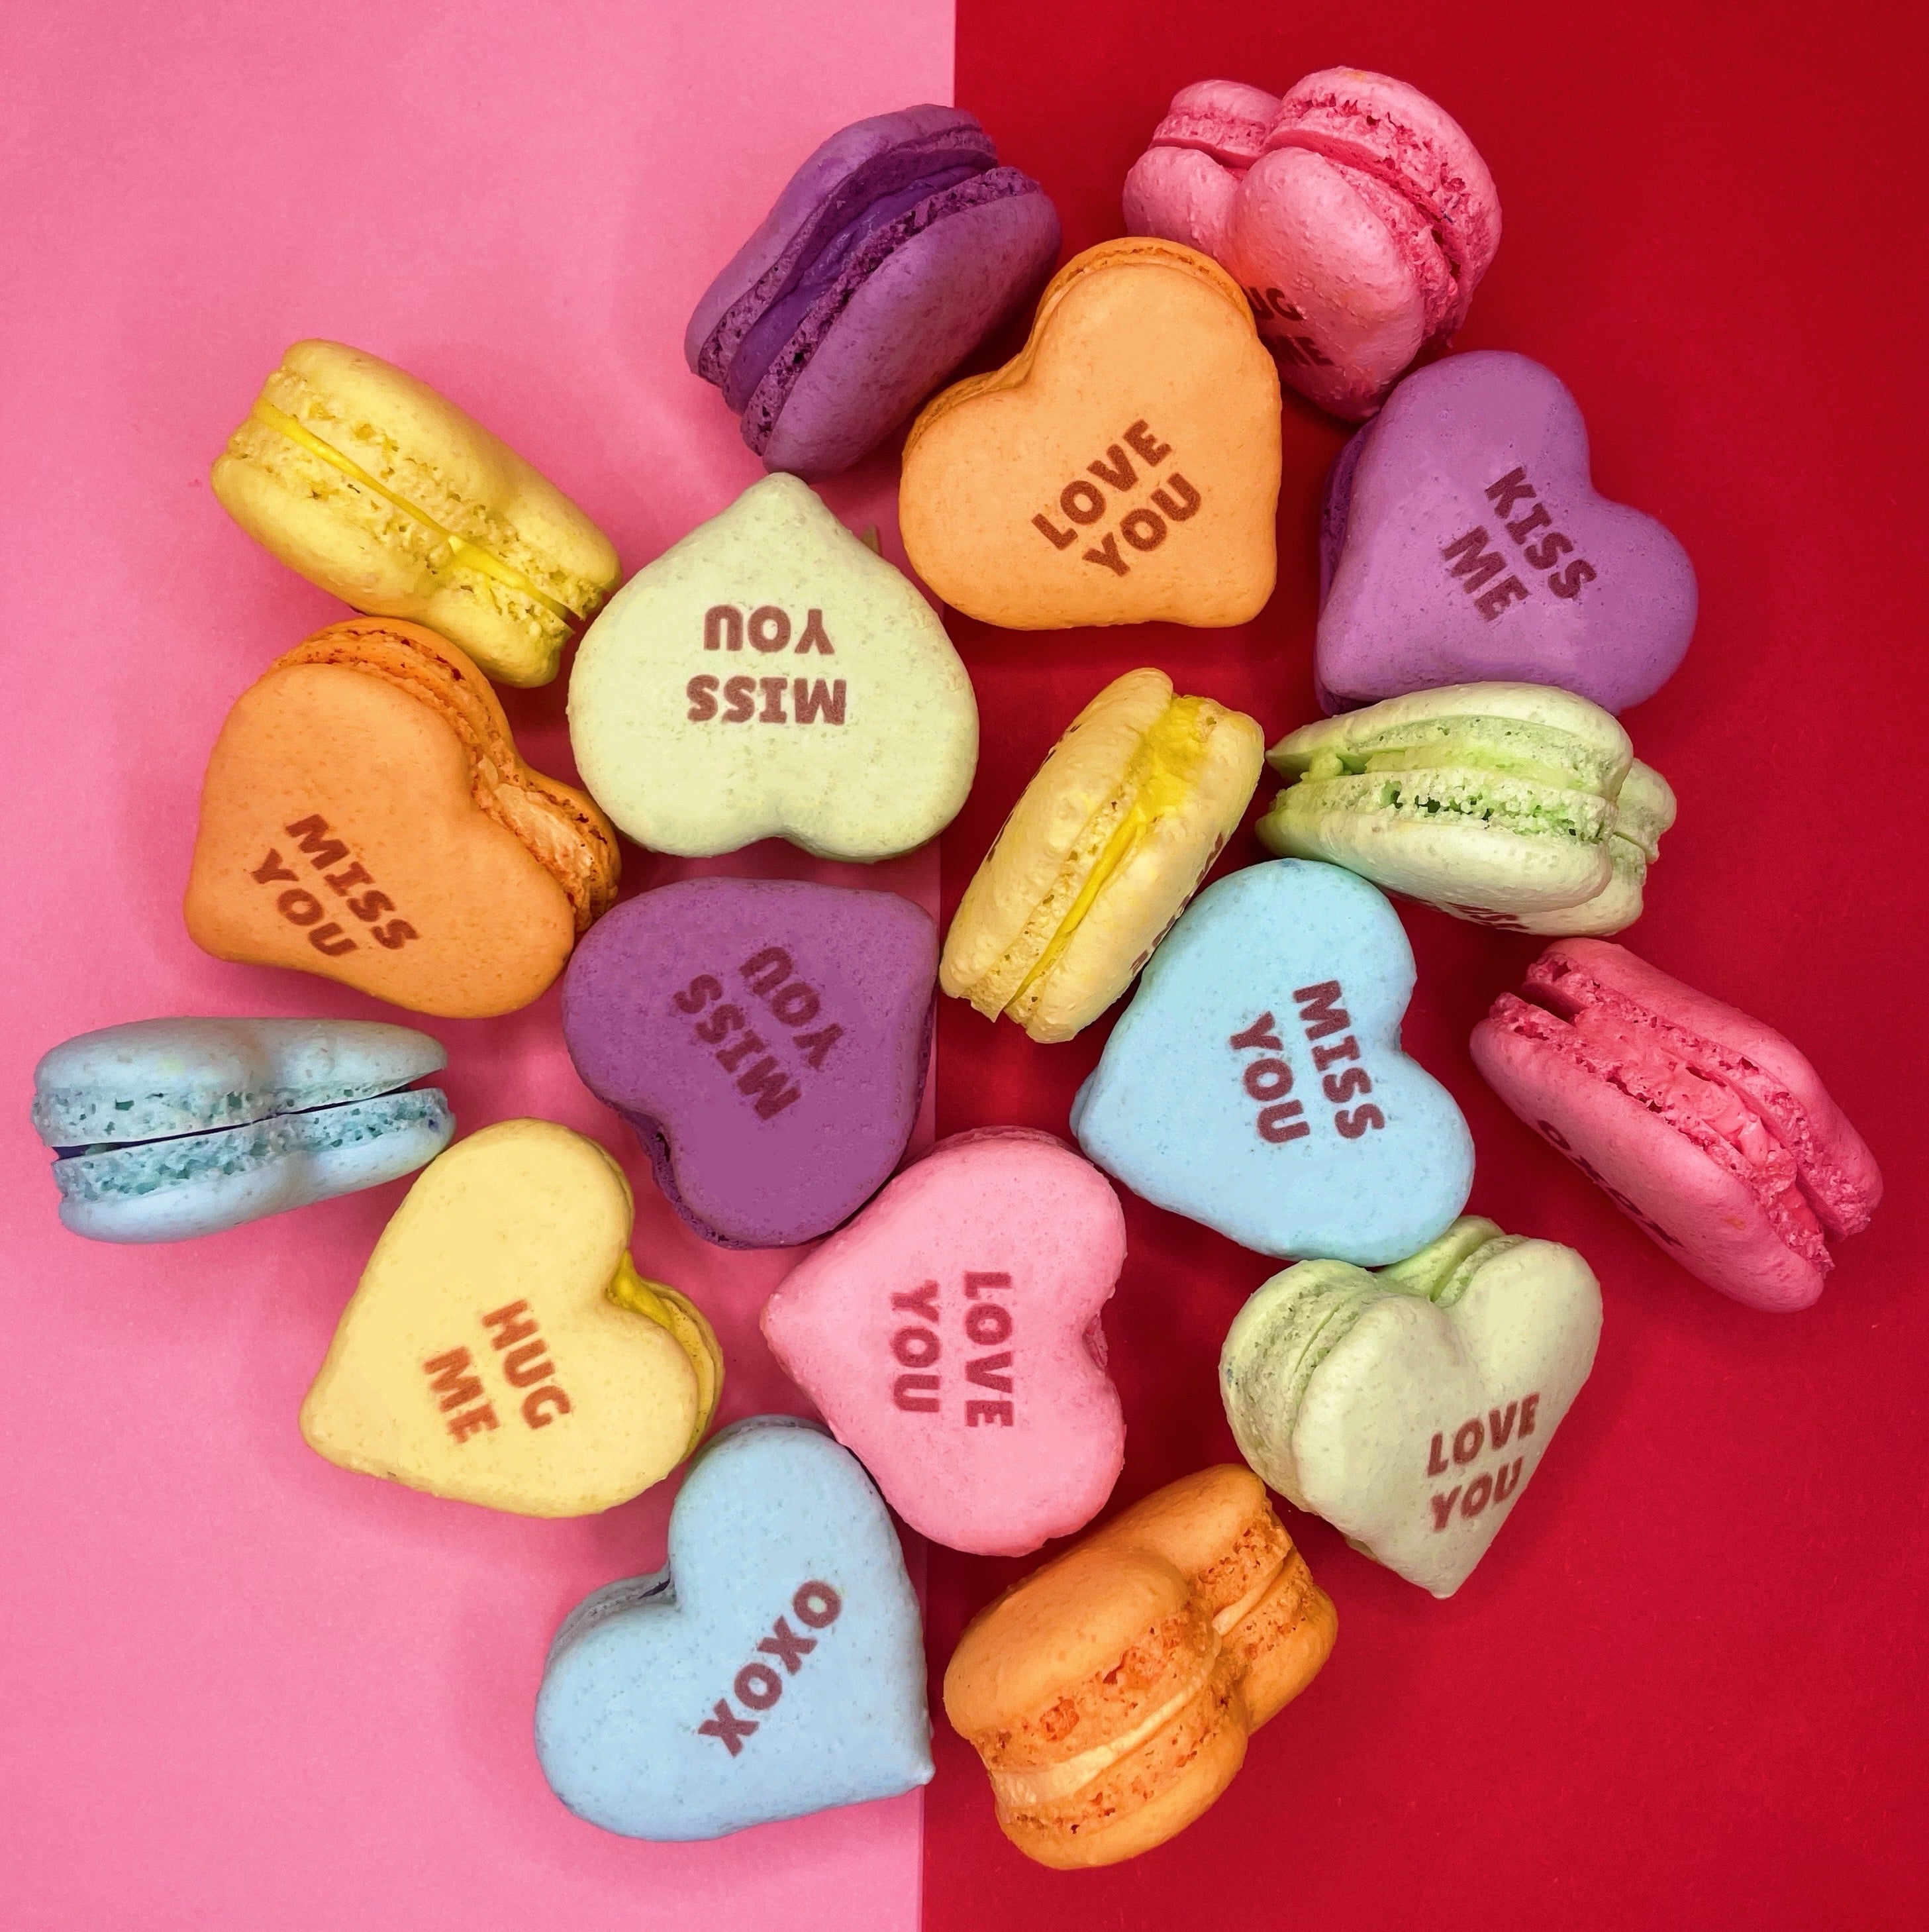 Limited Edition Candy Heart Macarons